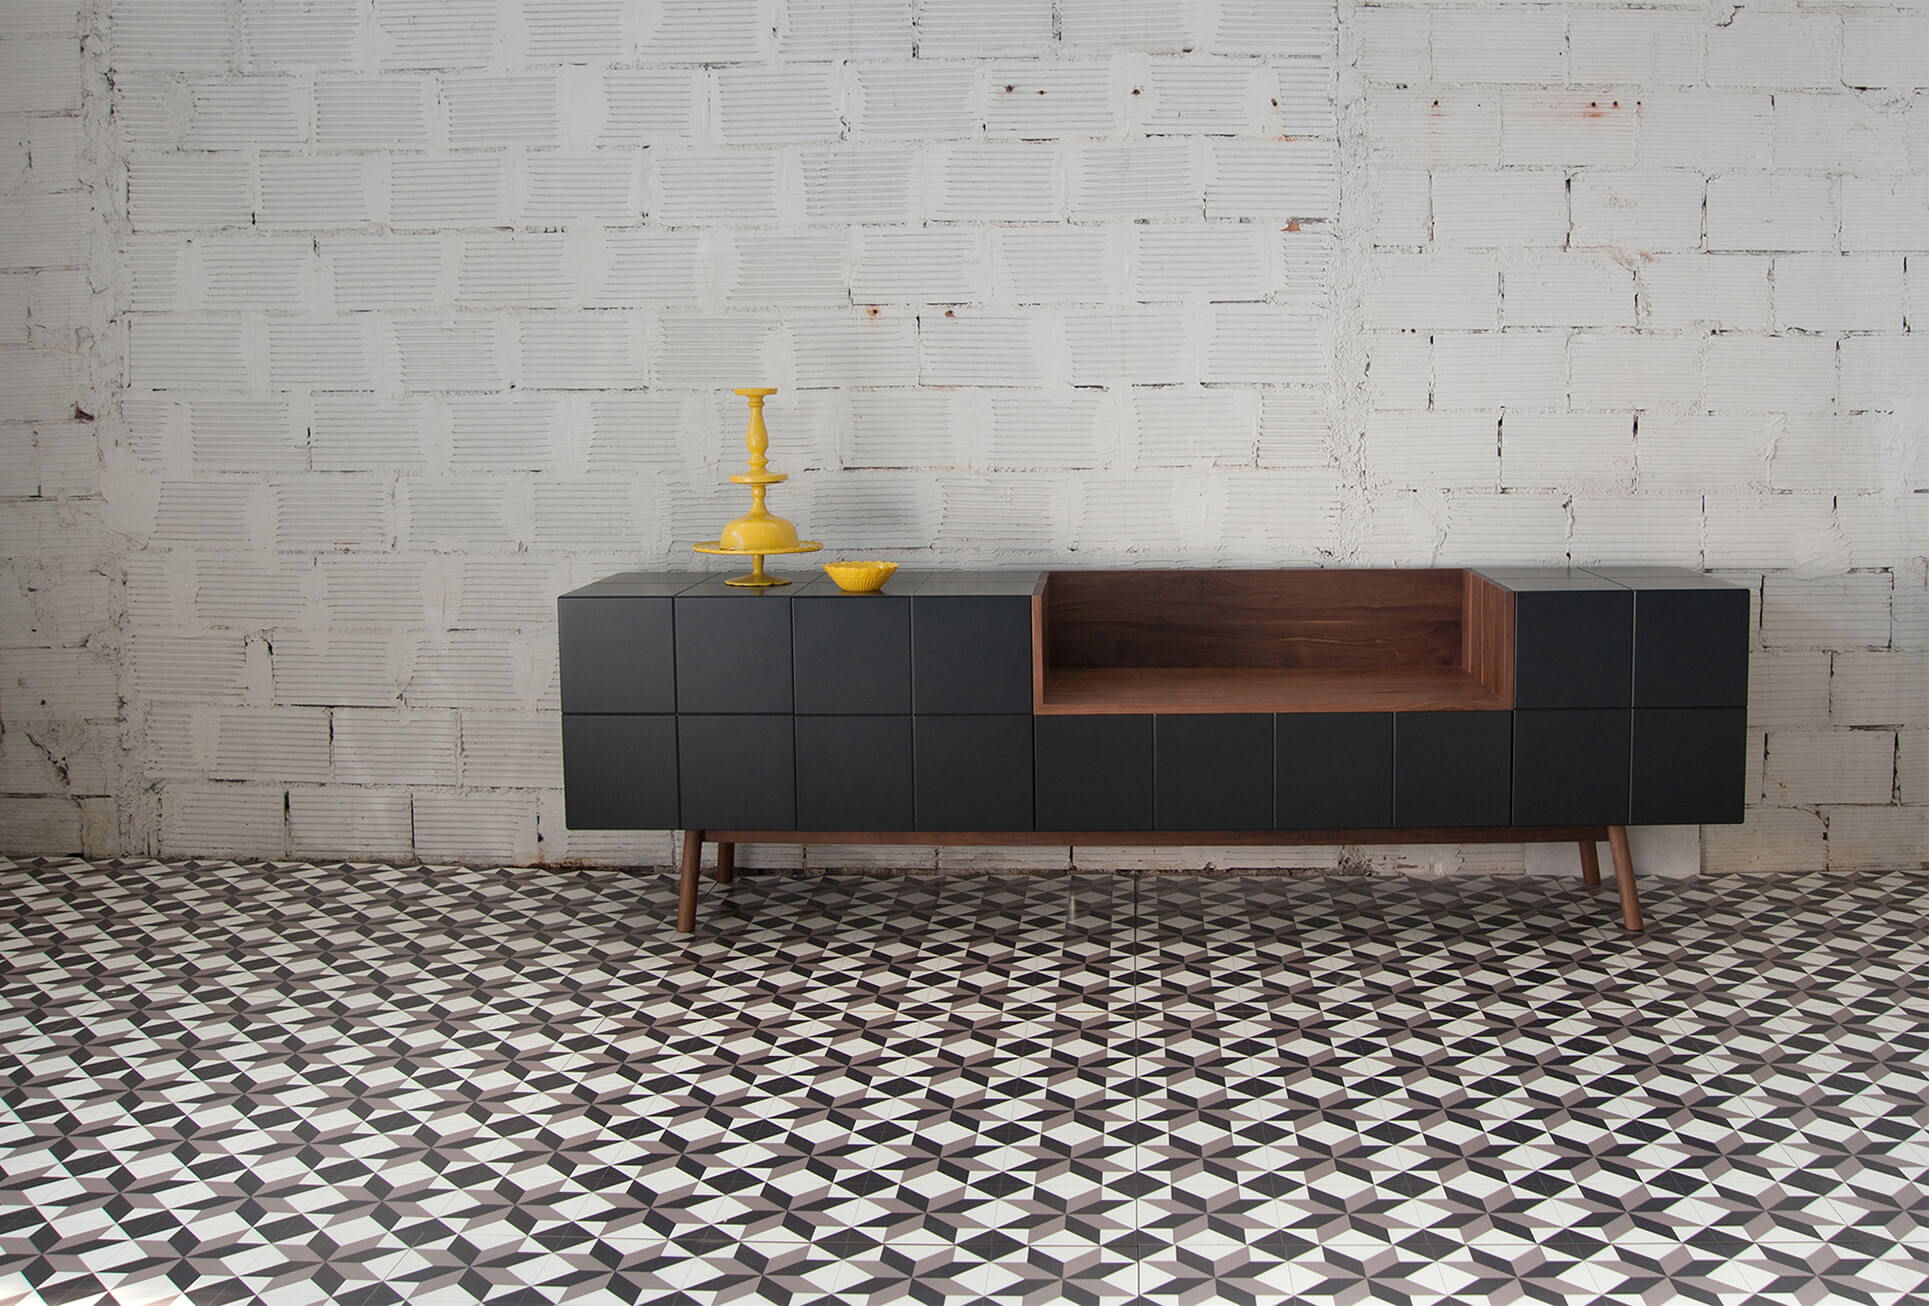 Mos-i-ko A 003 sideboard in black lacquer and walnut wood